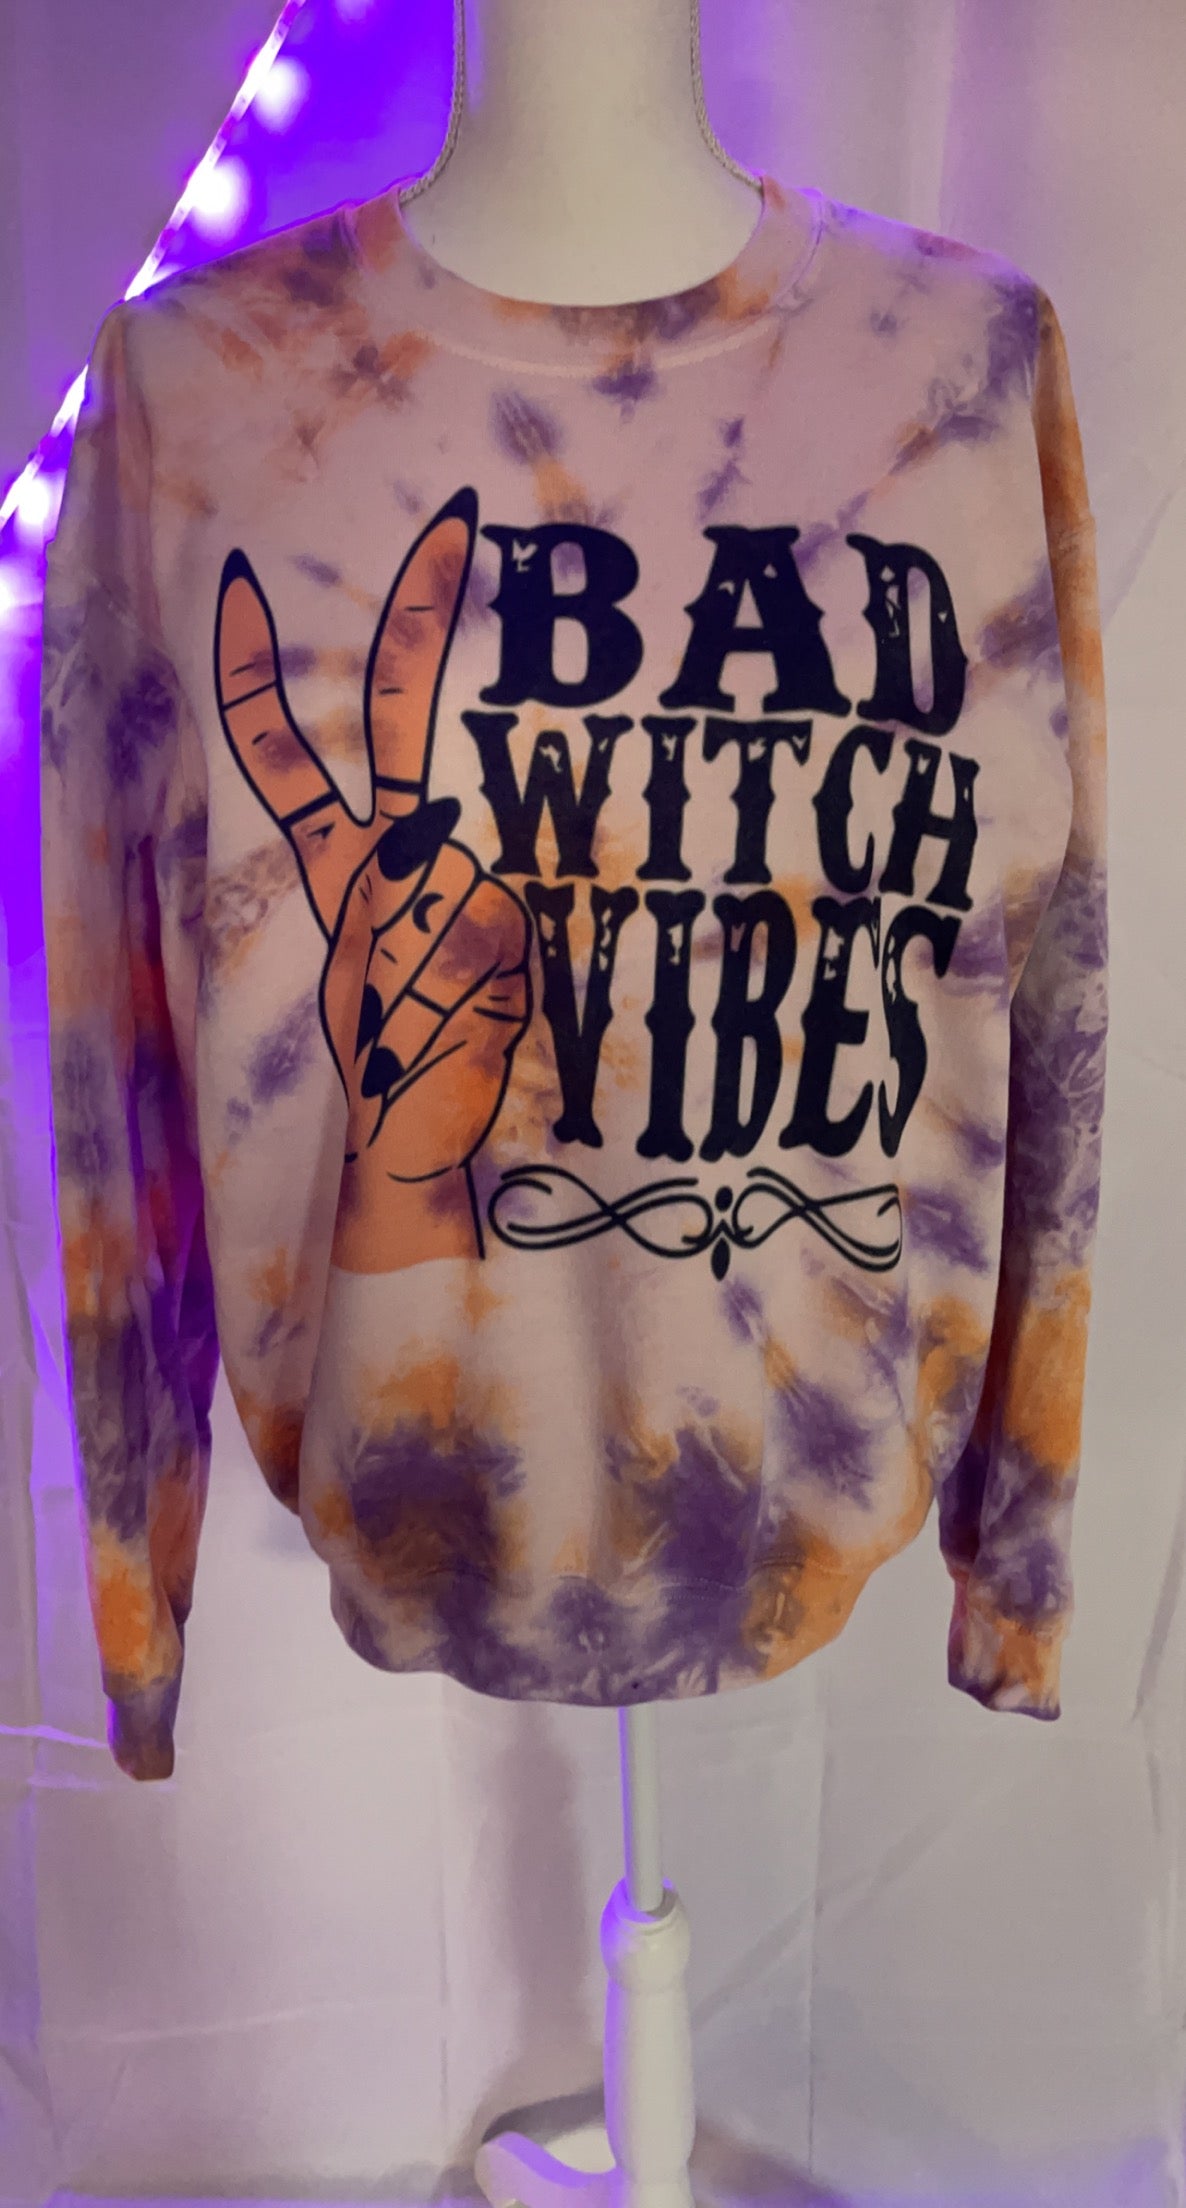 Bad witch vibes 🖤💜🧡✌️